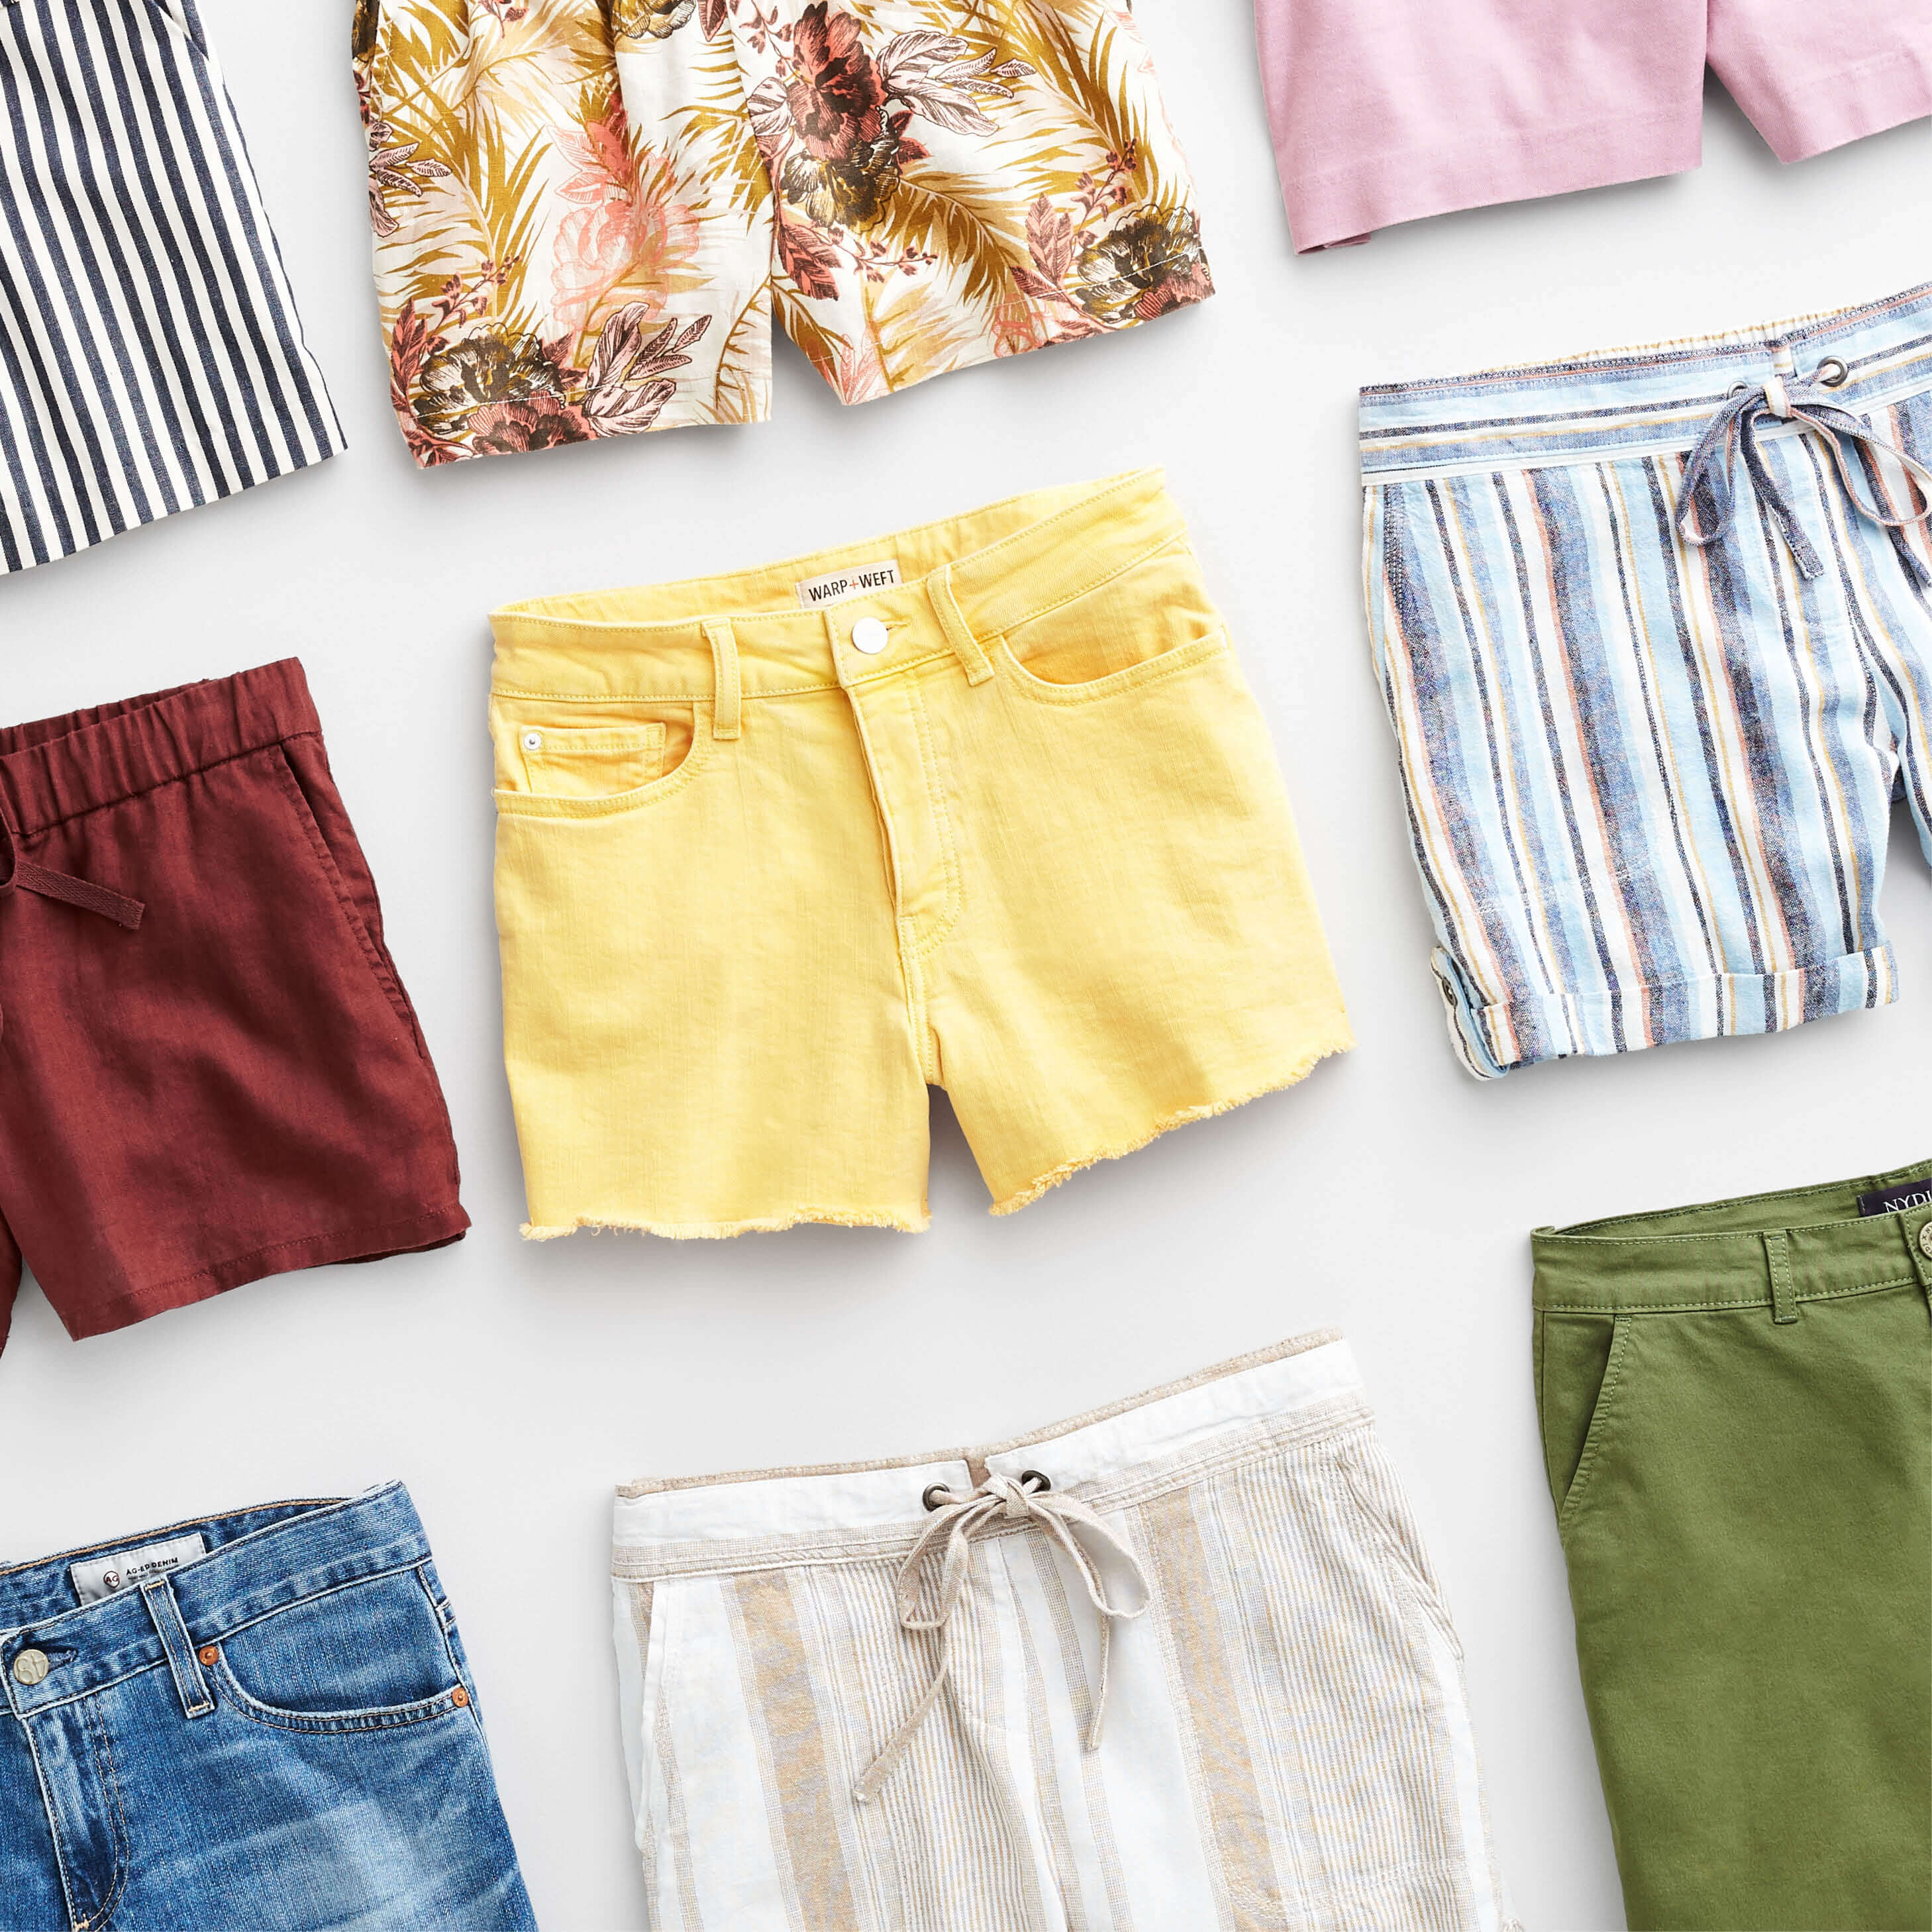 How to Style Shorts for Your Shape